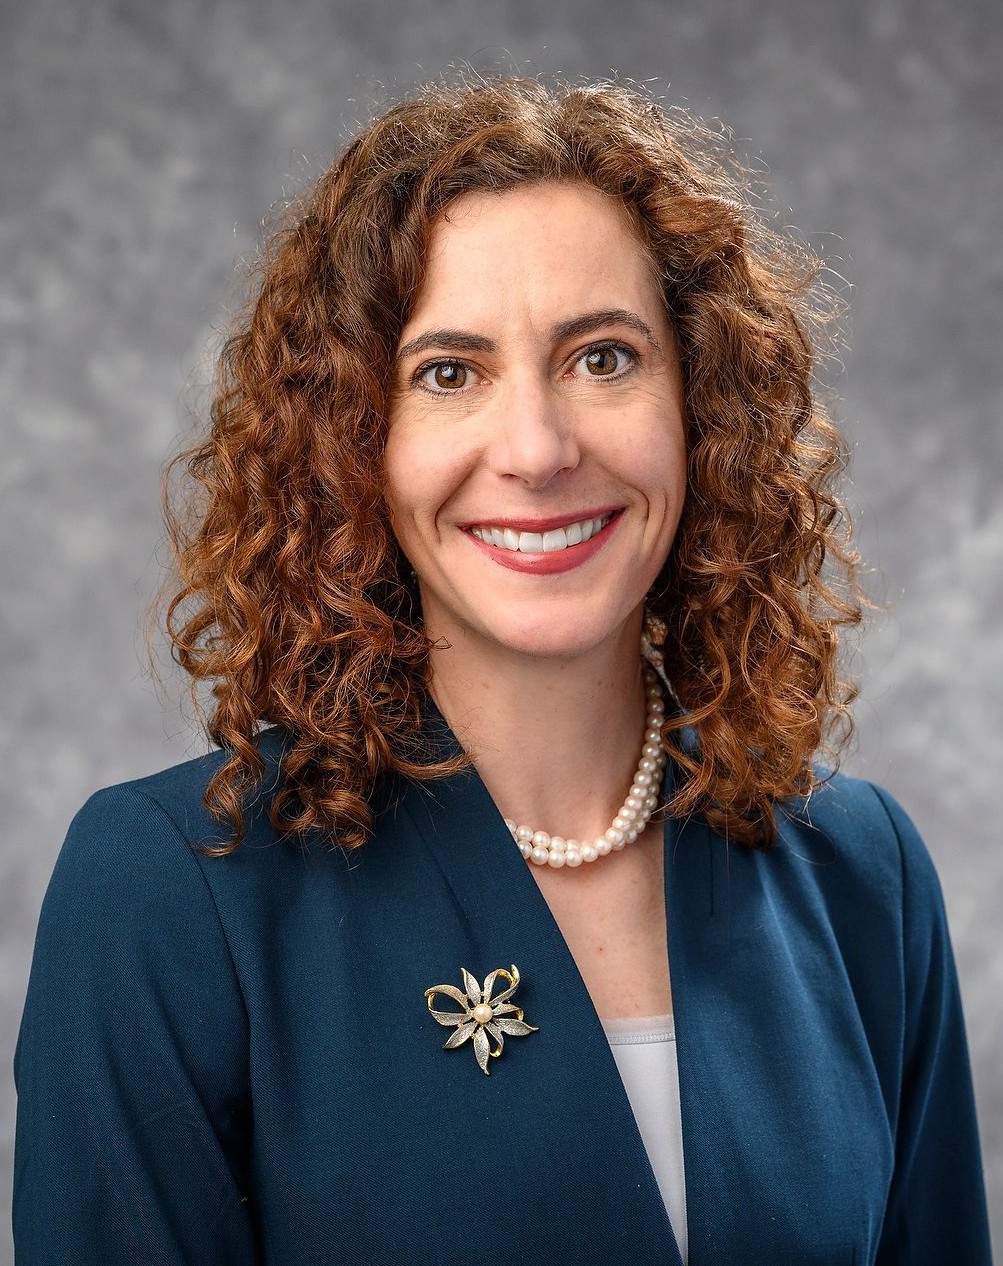 Laura Albert, Professor and the David Gustafson Department Chair of Industrial and Systems Engineering at the University of Wisconsin-Madison